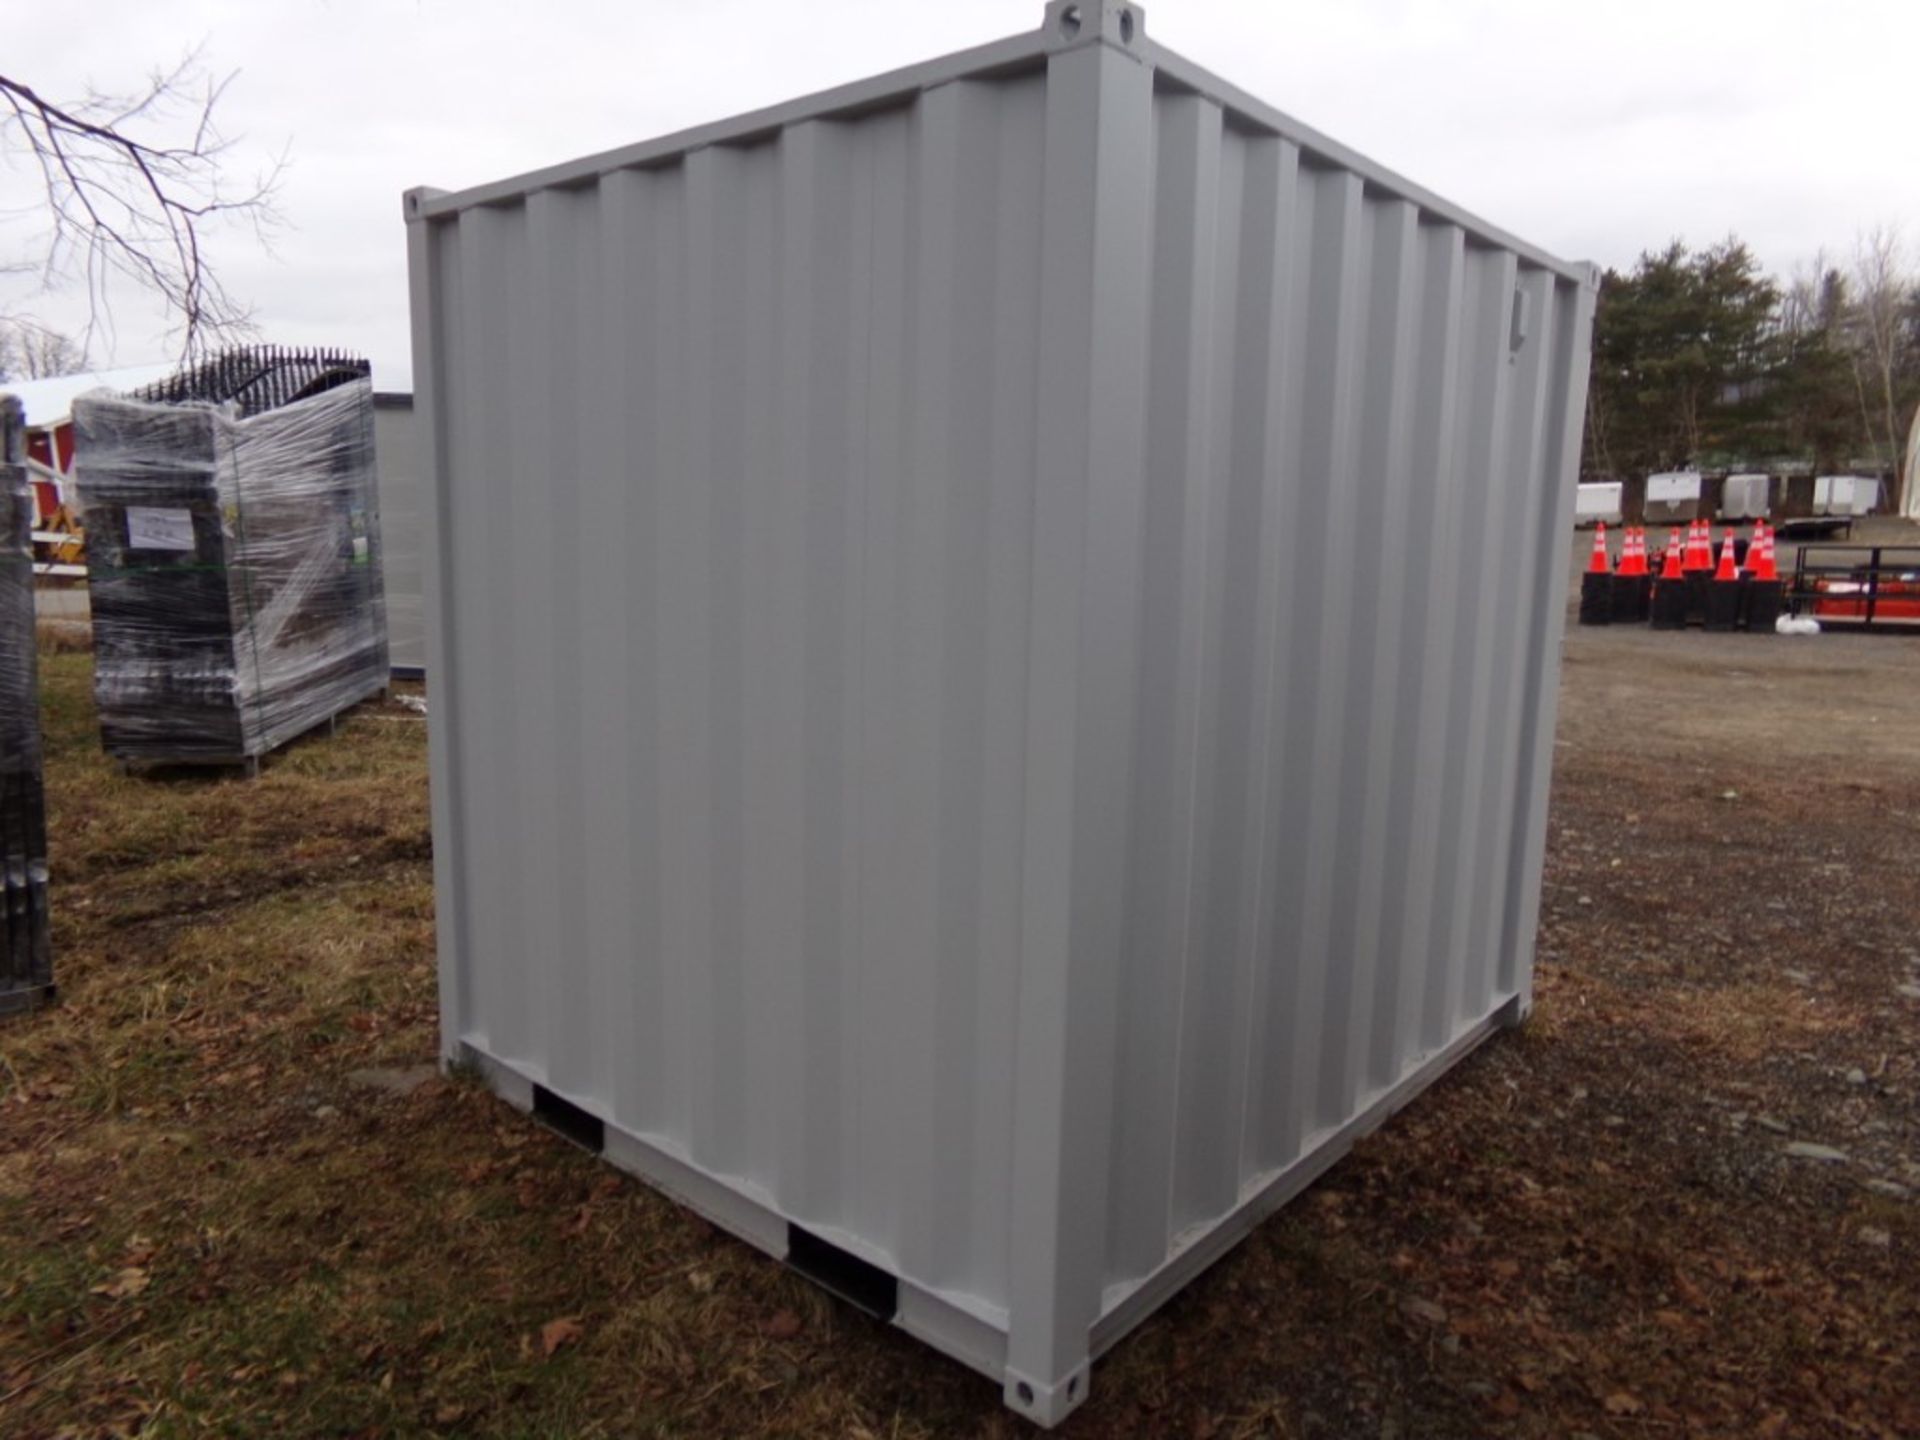 New, 8' x 80'', Lockable Storage Container/Office Builing, Walk-Through Door, Barred Window, Barn - Image 3 of 5